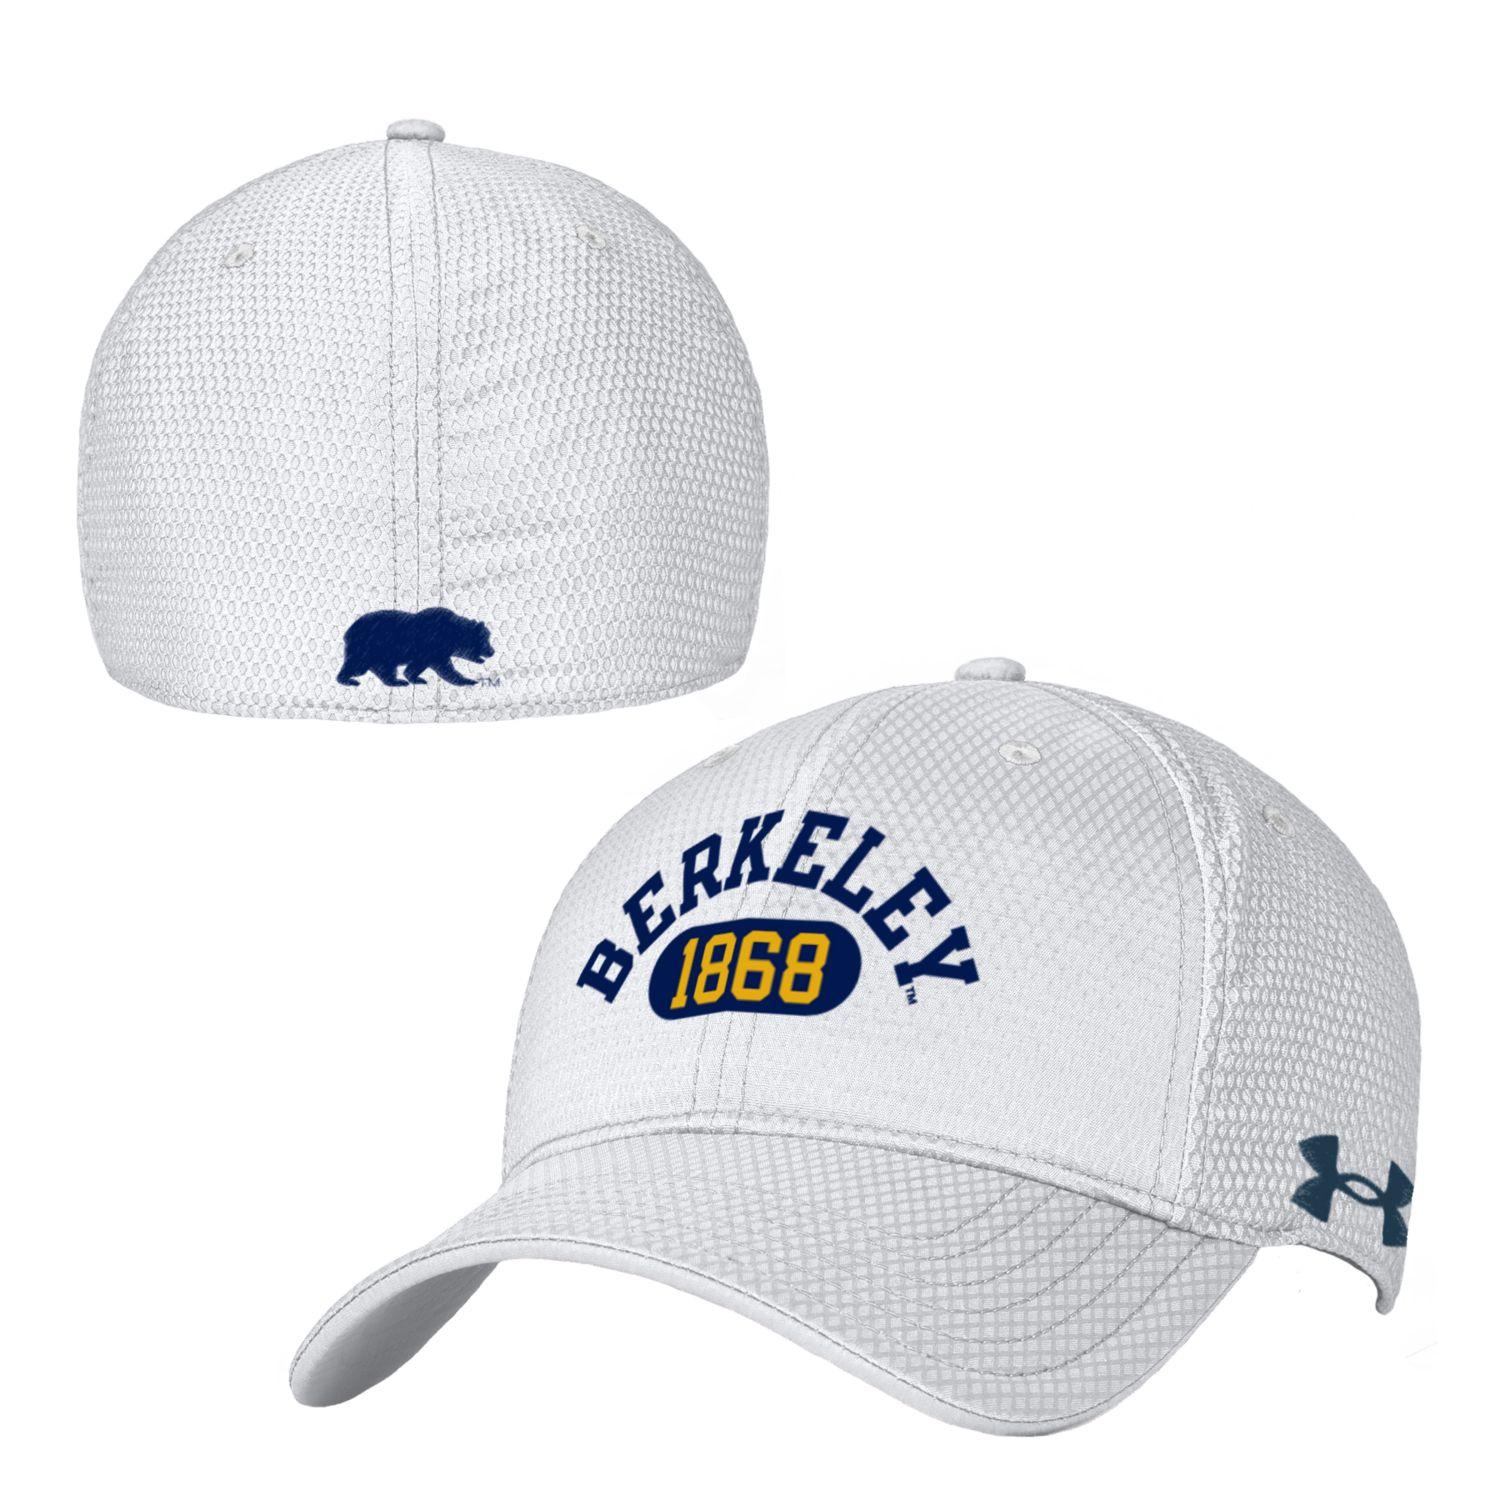 U.C. Berkeley Cal 1868 Embroidered Stretch Fit Under Armour Cap in White | Men's | Size Medium/Large